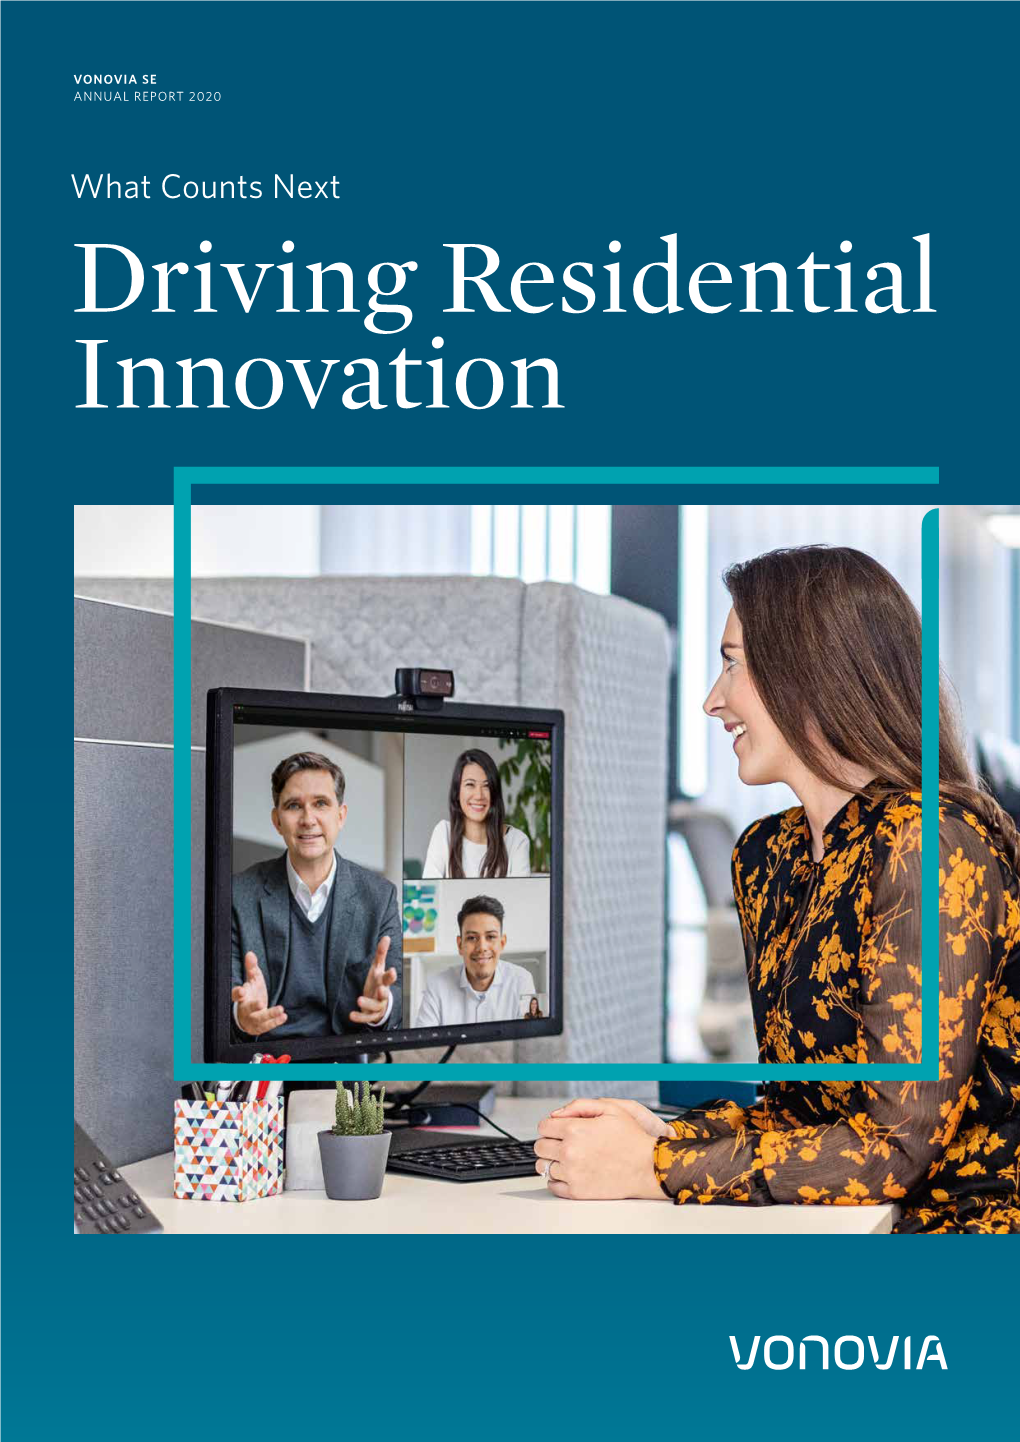 Driving Residential Innovation Key Figures